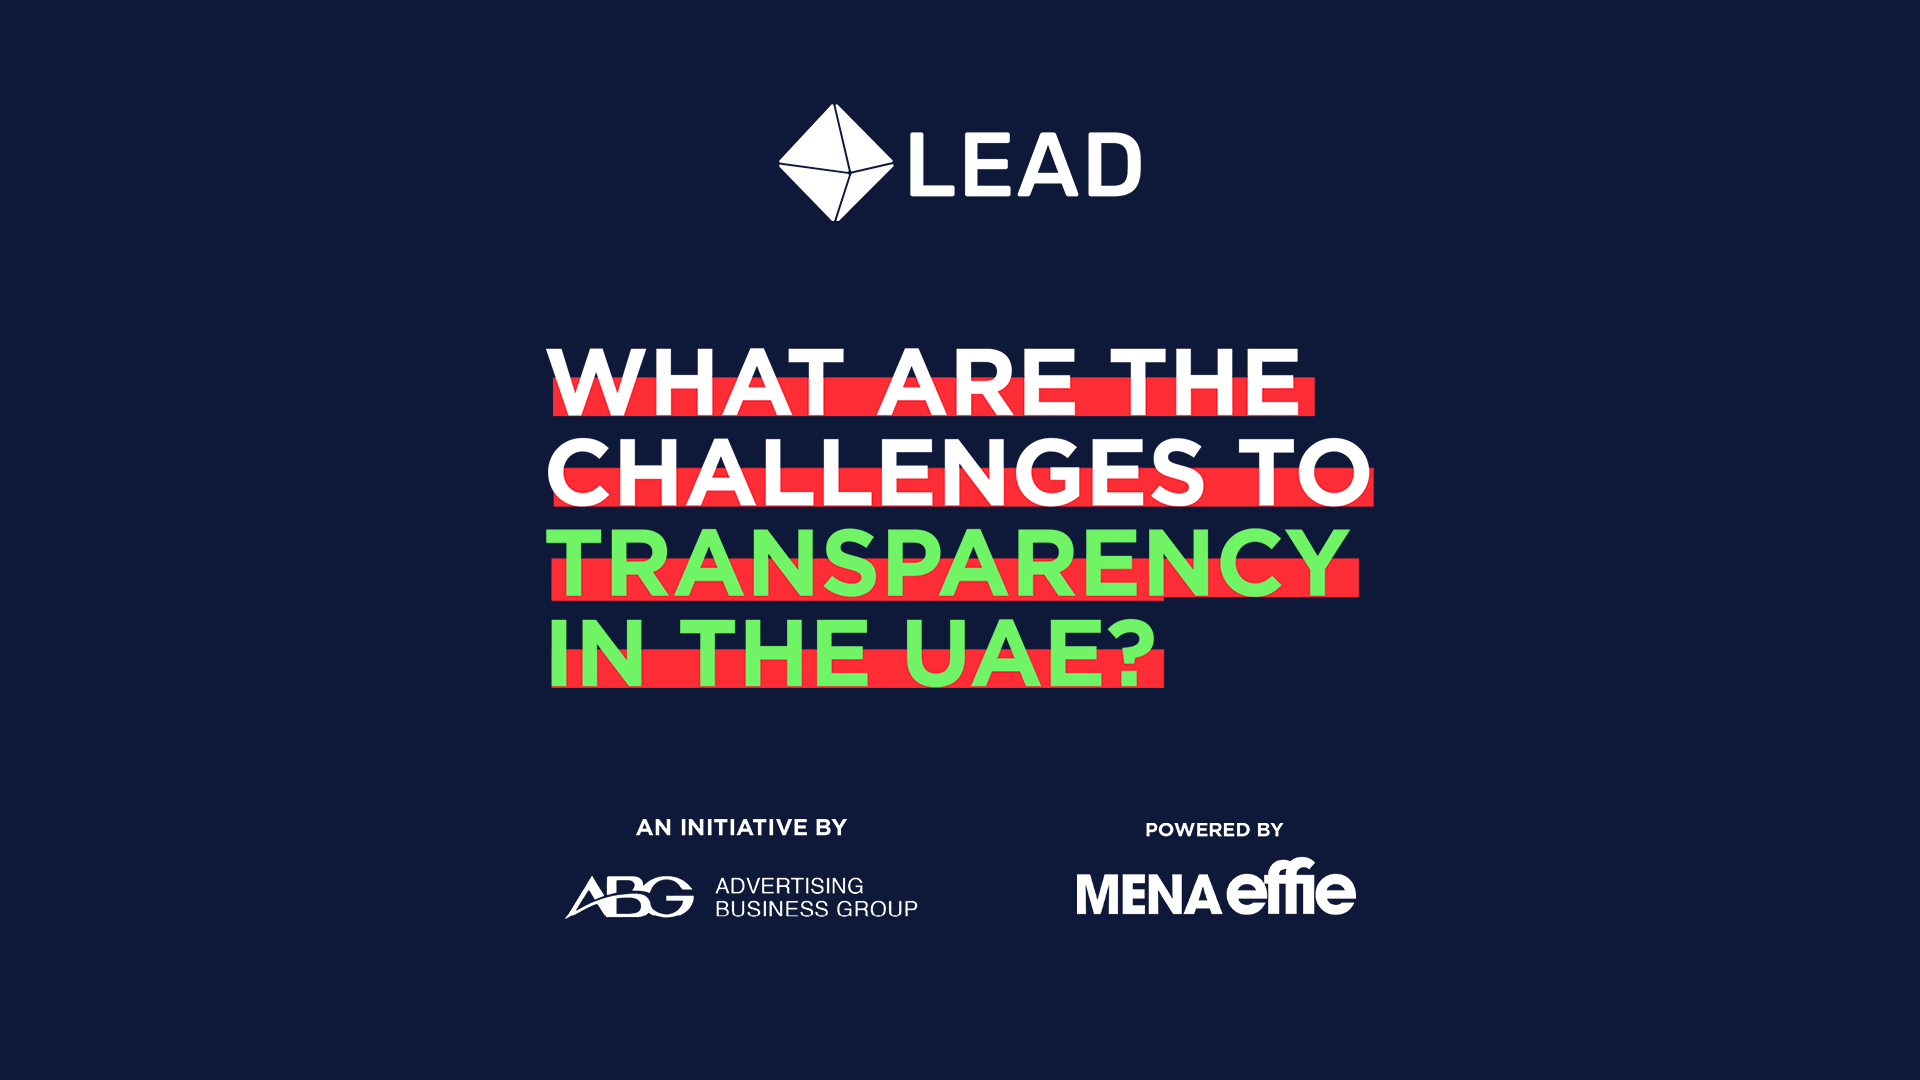 What Are the Challenges to Transparency in the UAE?